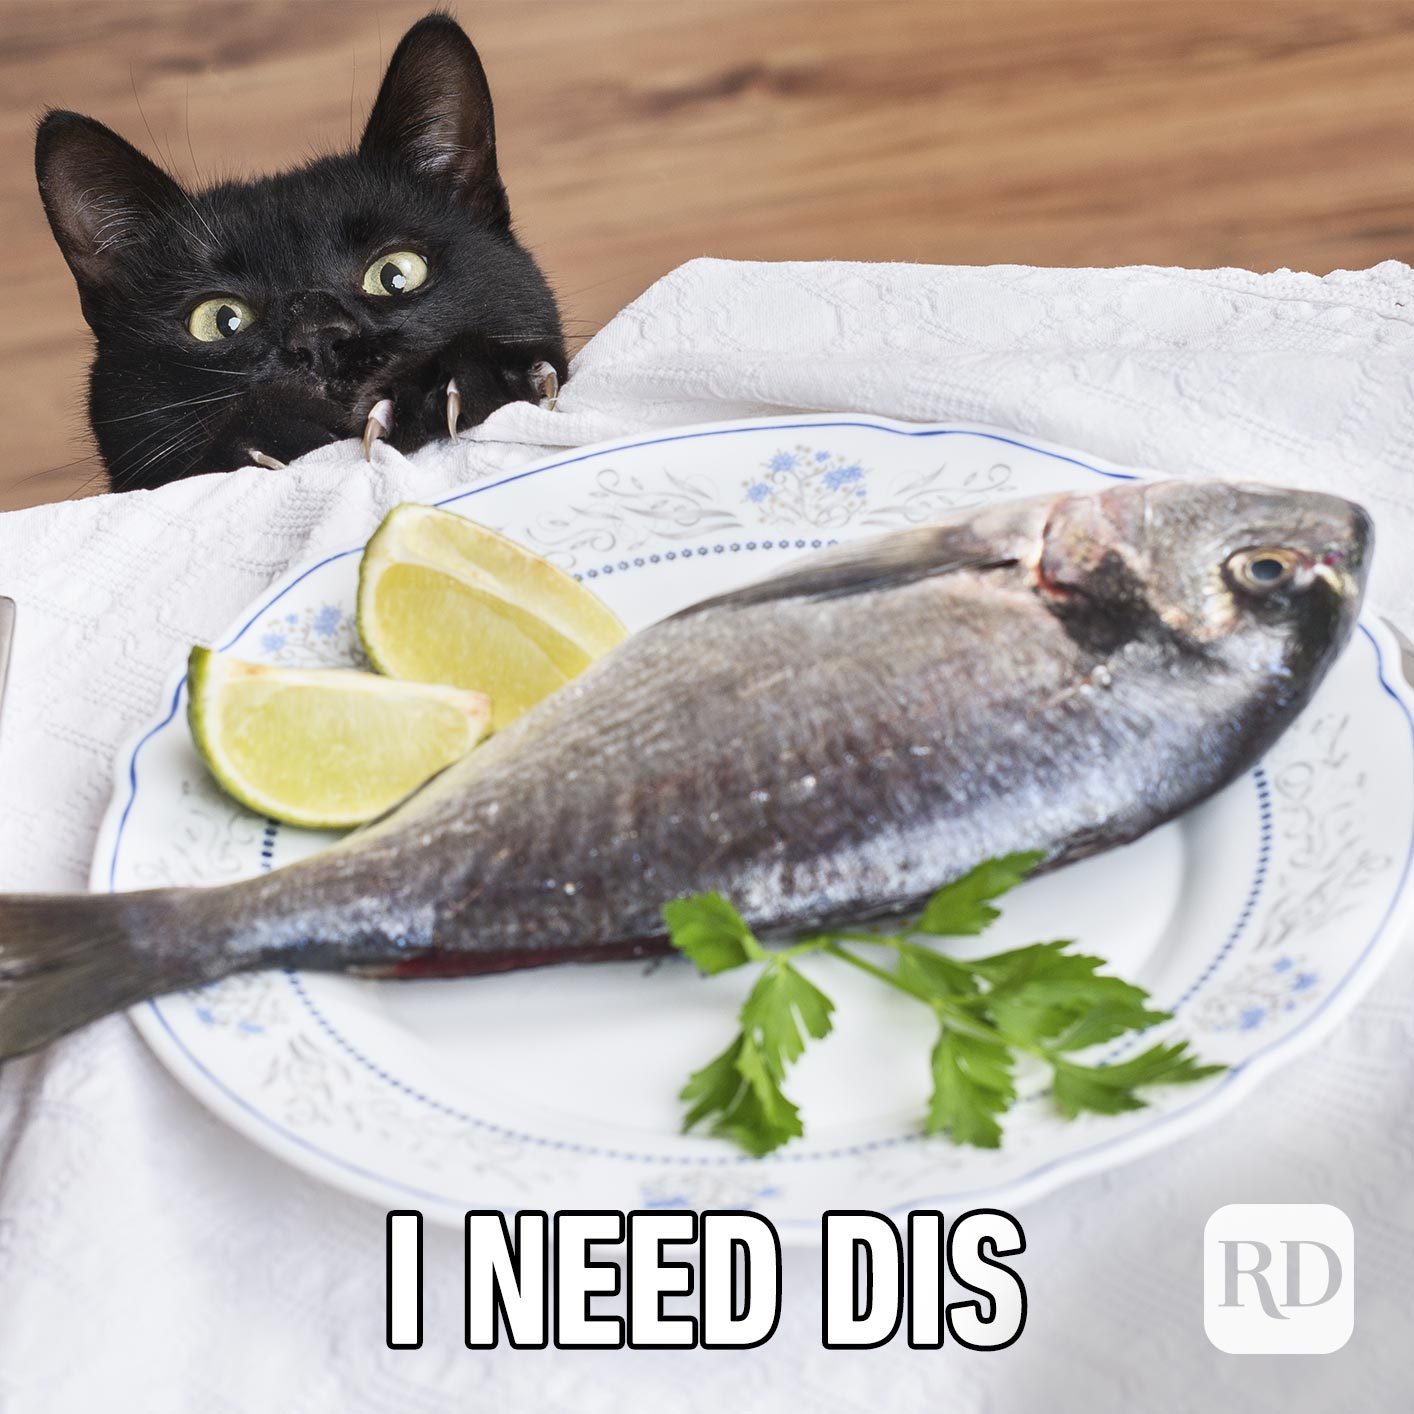 Image of cat looking at fish that says "i need dis"